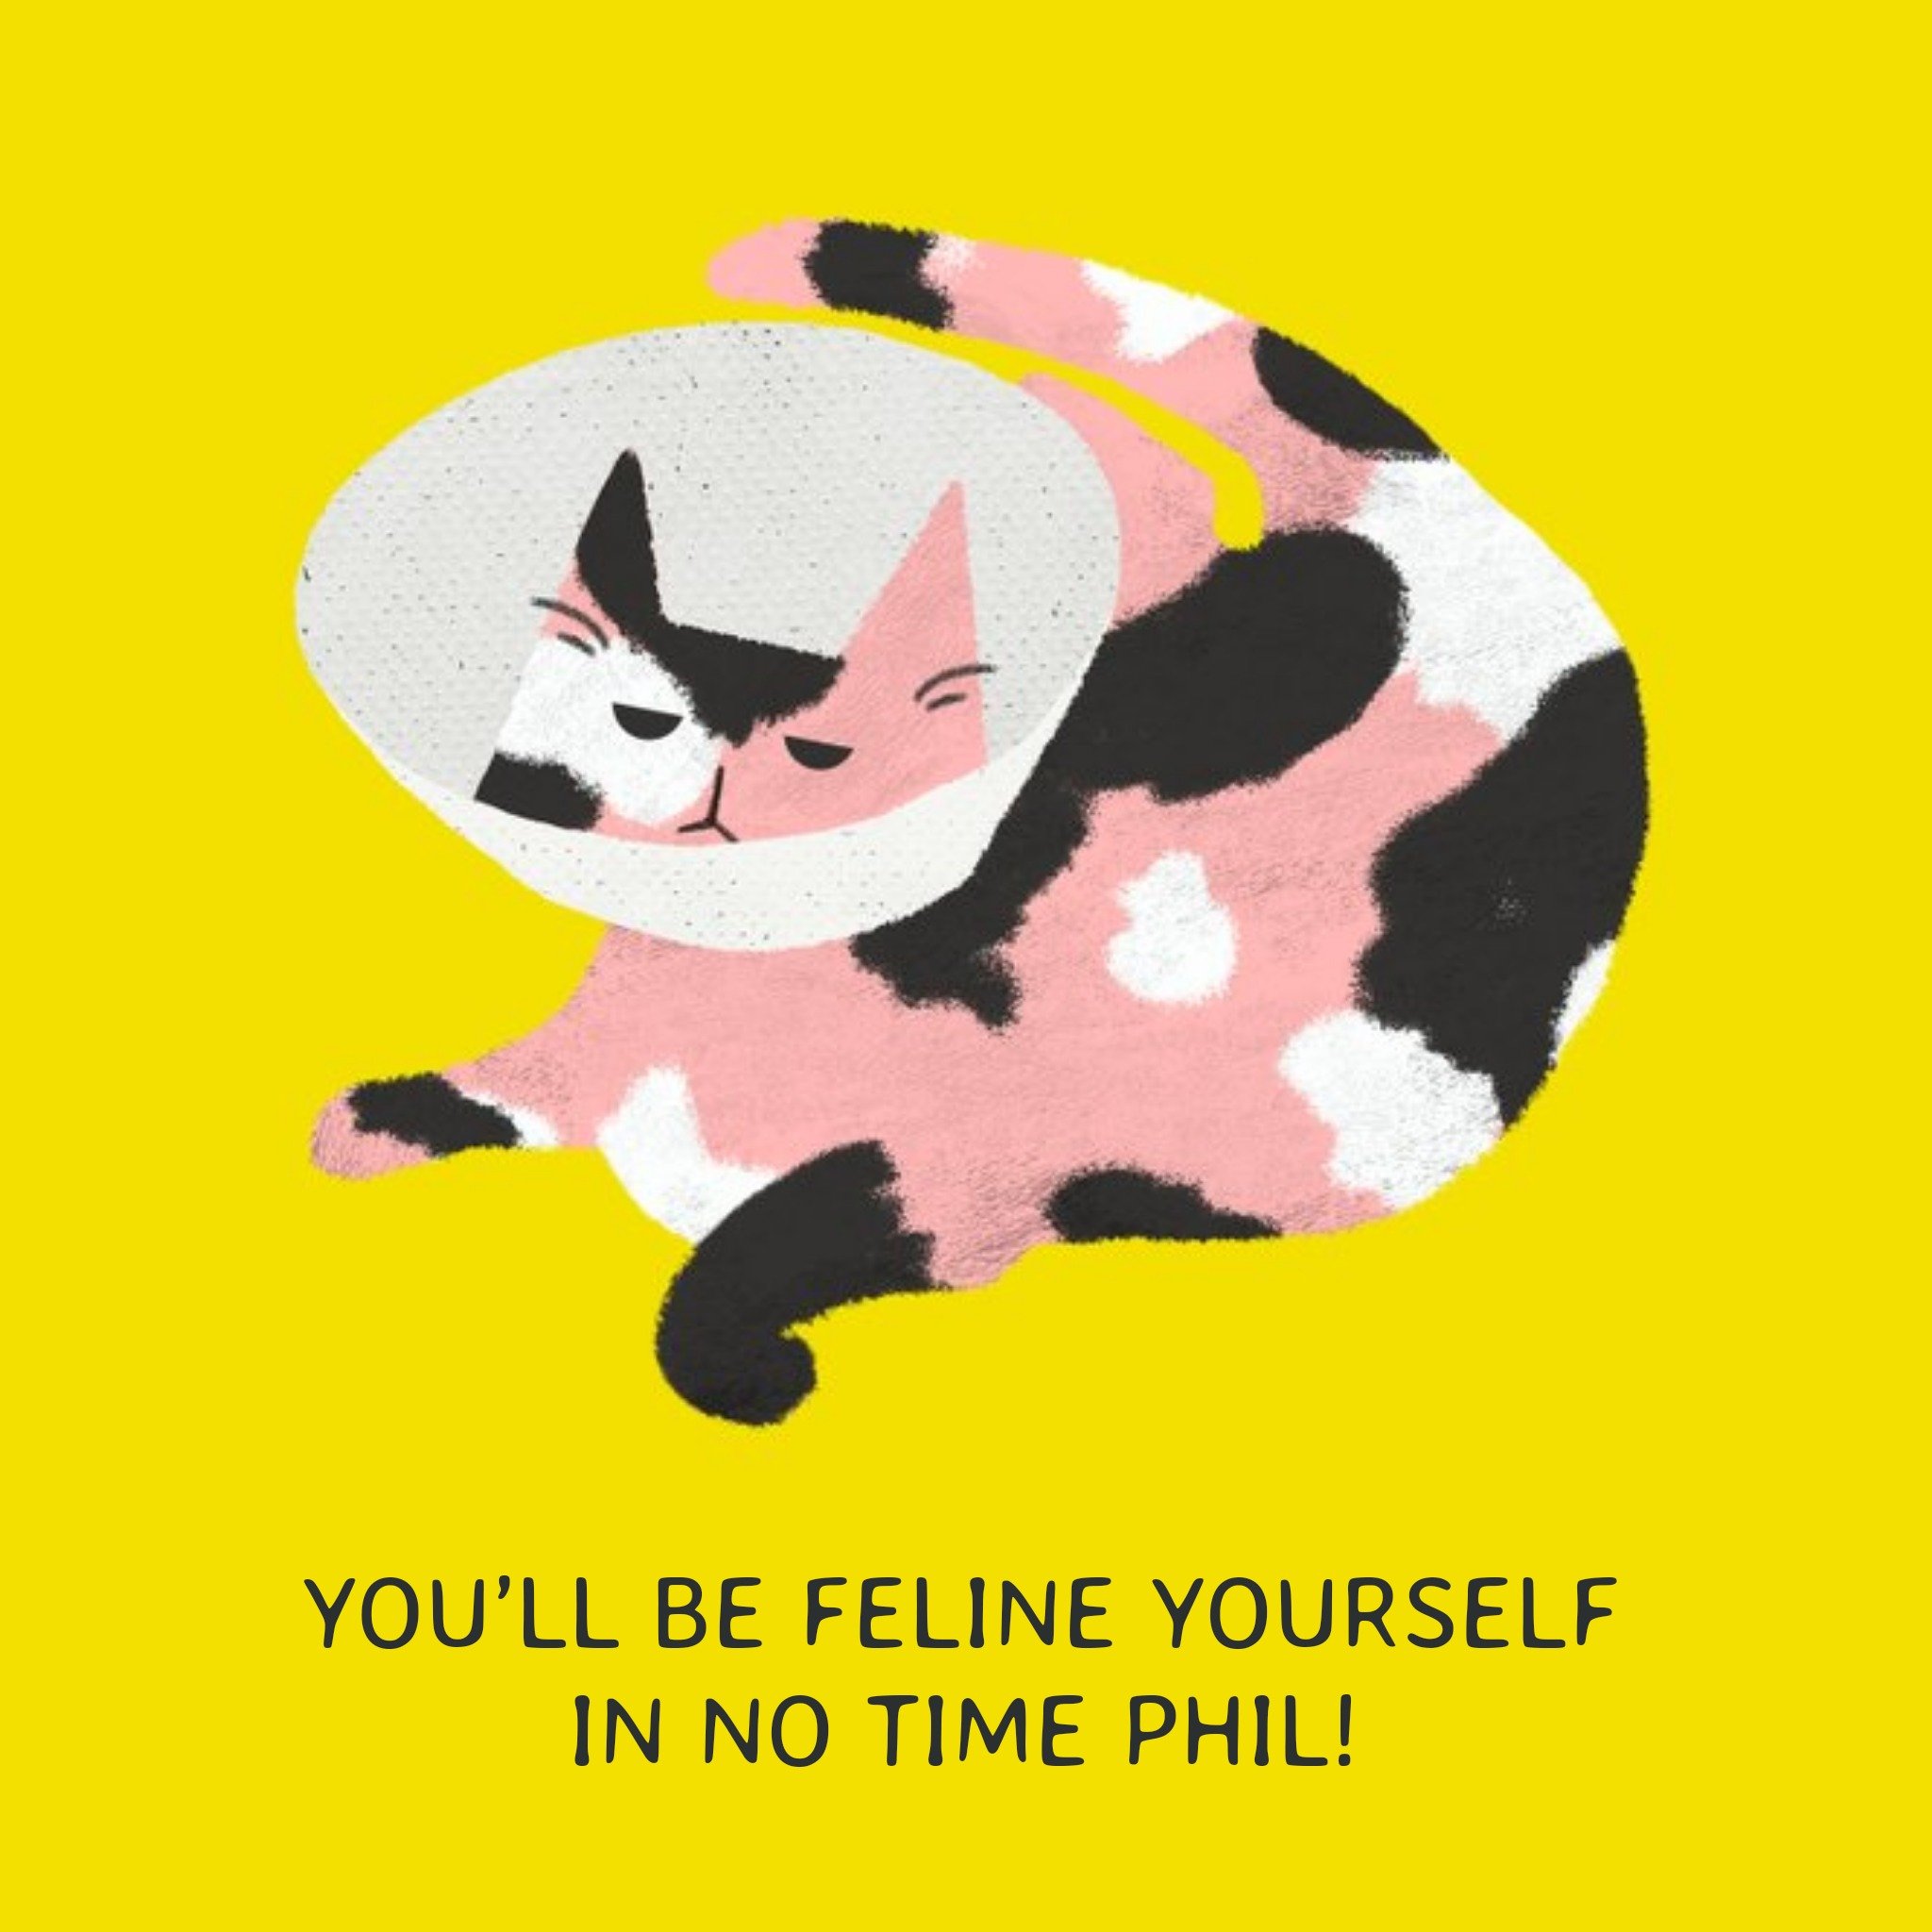 Moonpig Get Well Card - You'll Be Feline Yourself In No Time, Large